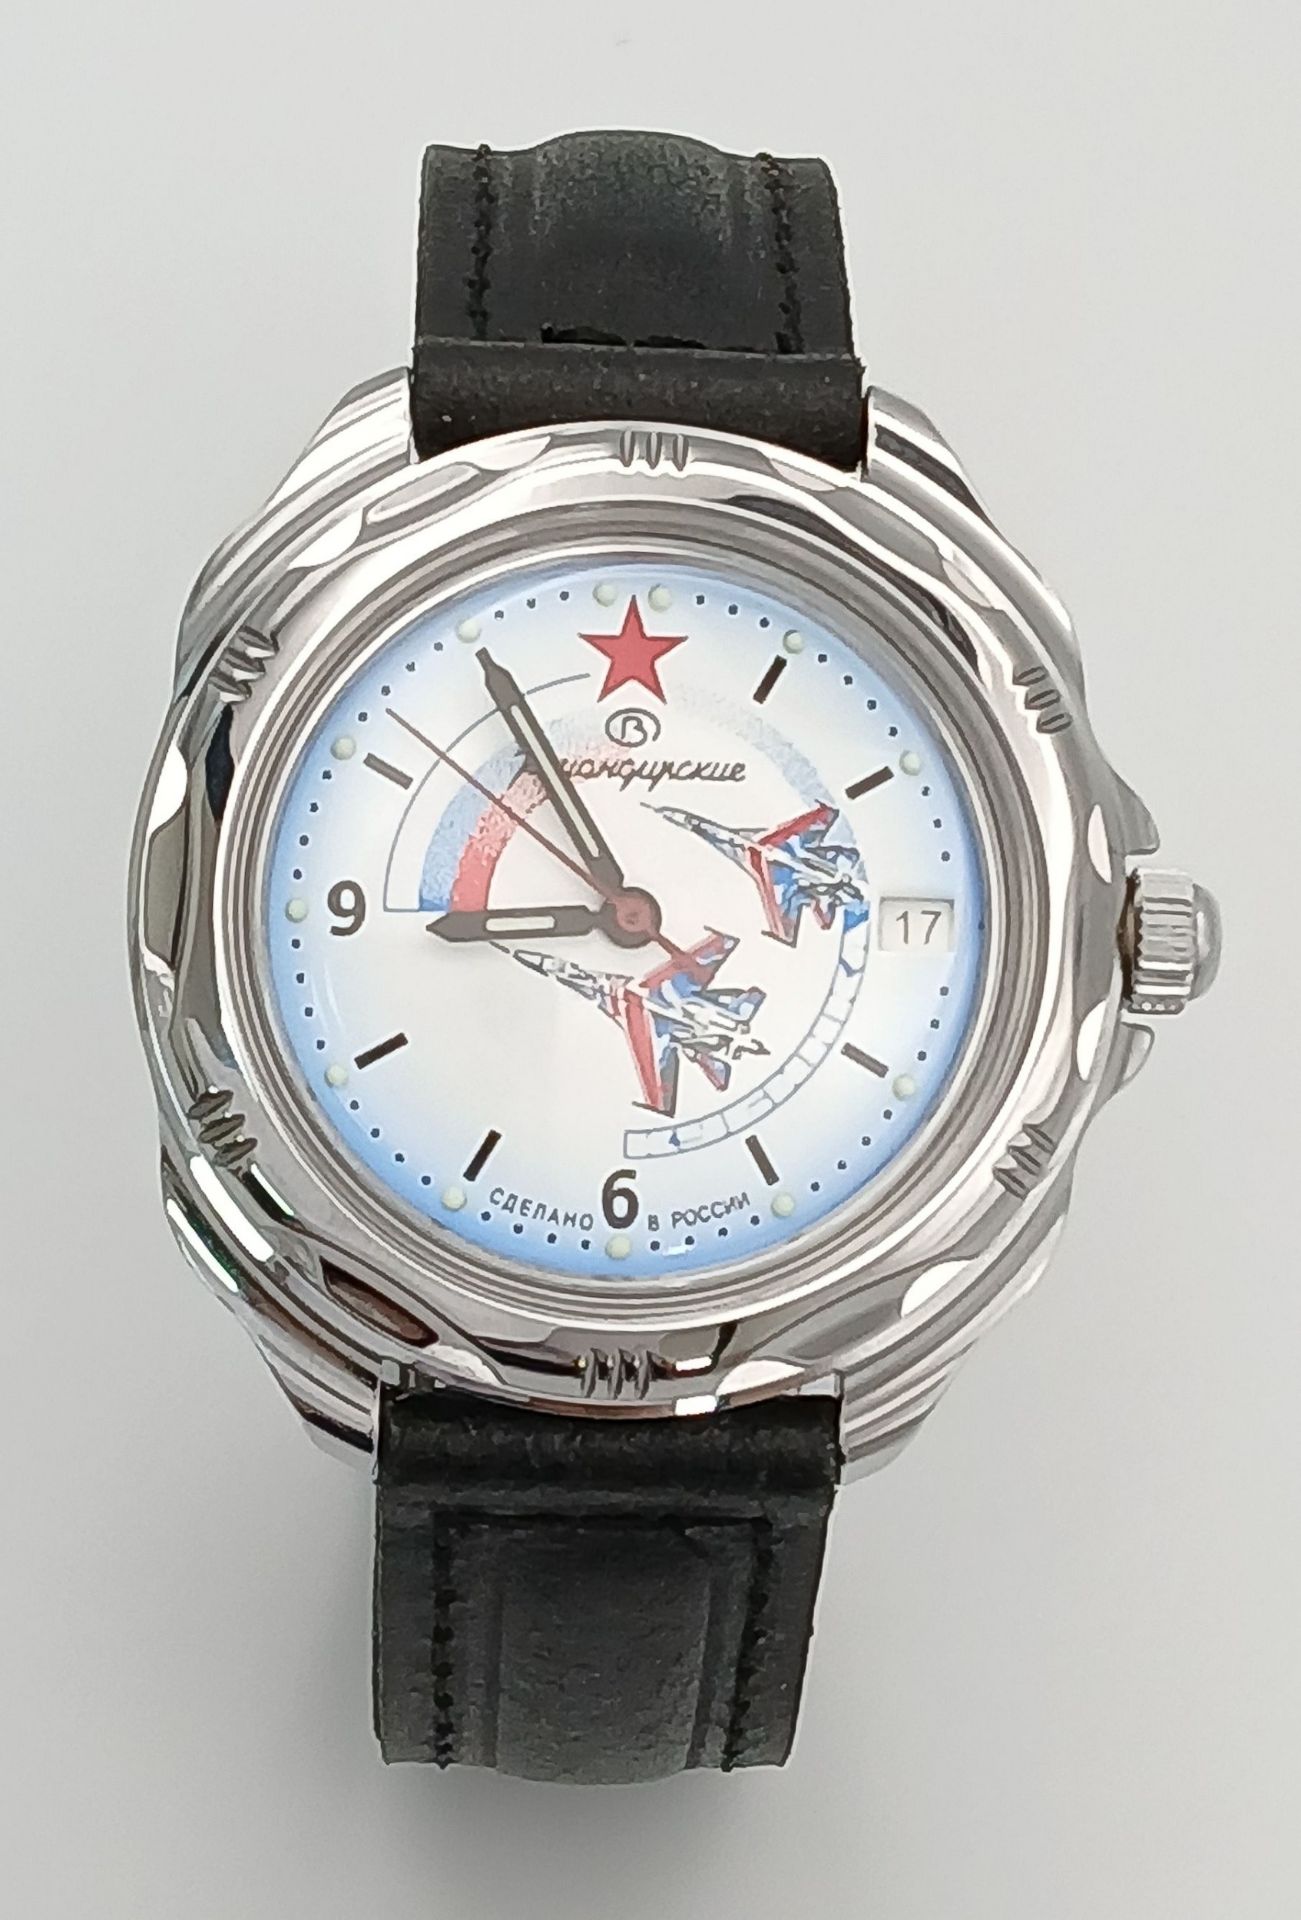 A Vostok Automatic Gents Watch. Black leather strap. Stainless steel case - 40mm. White dial with - Image 2 of 7